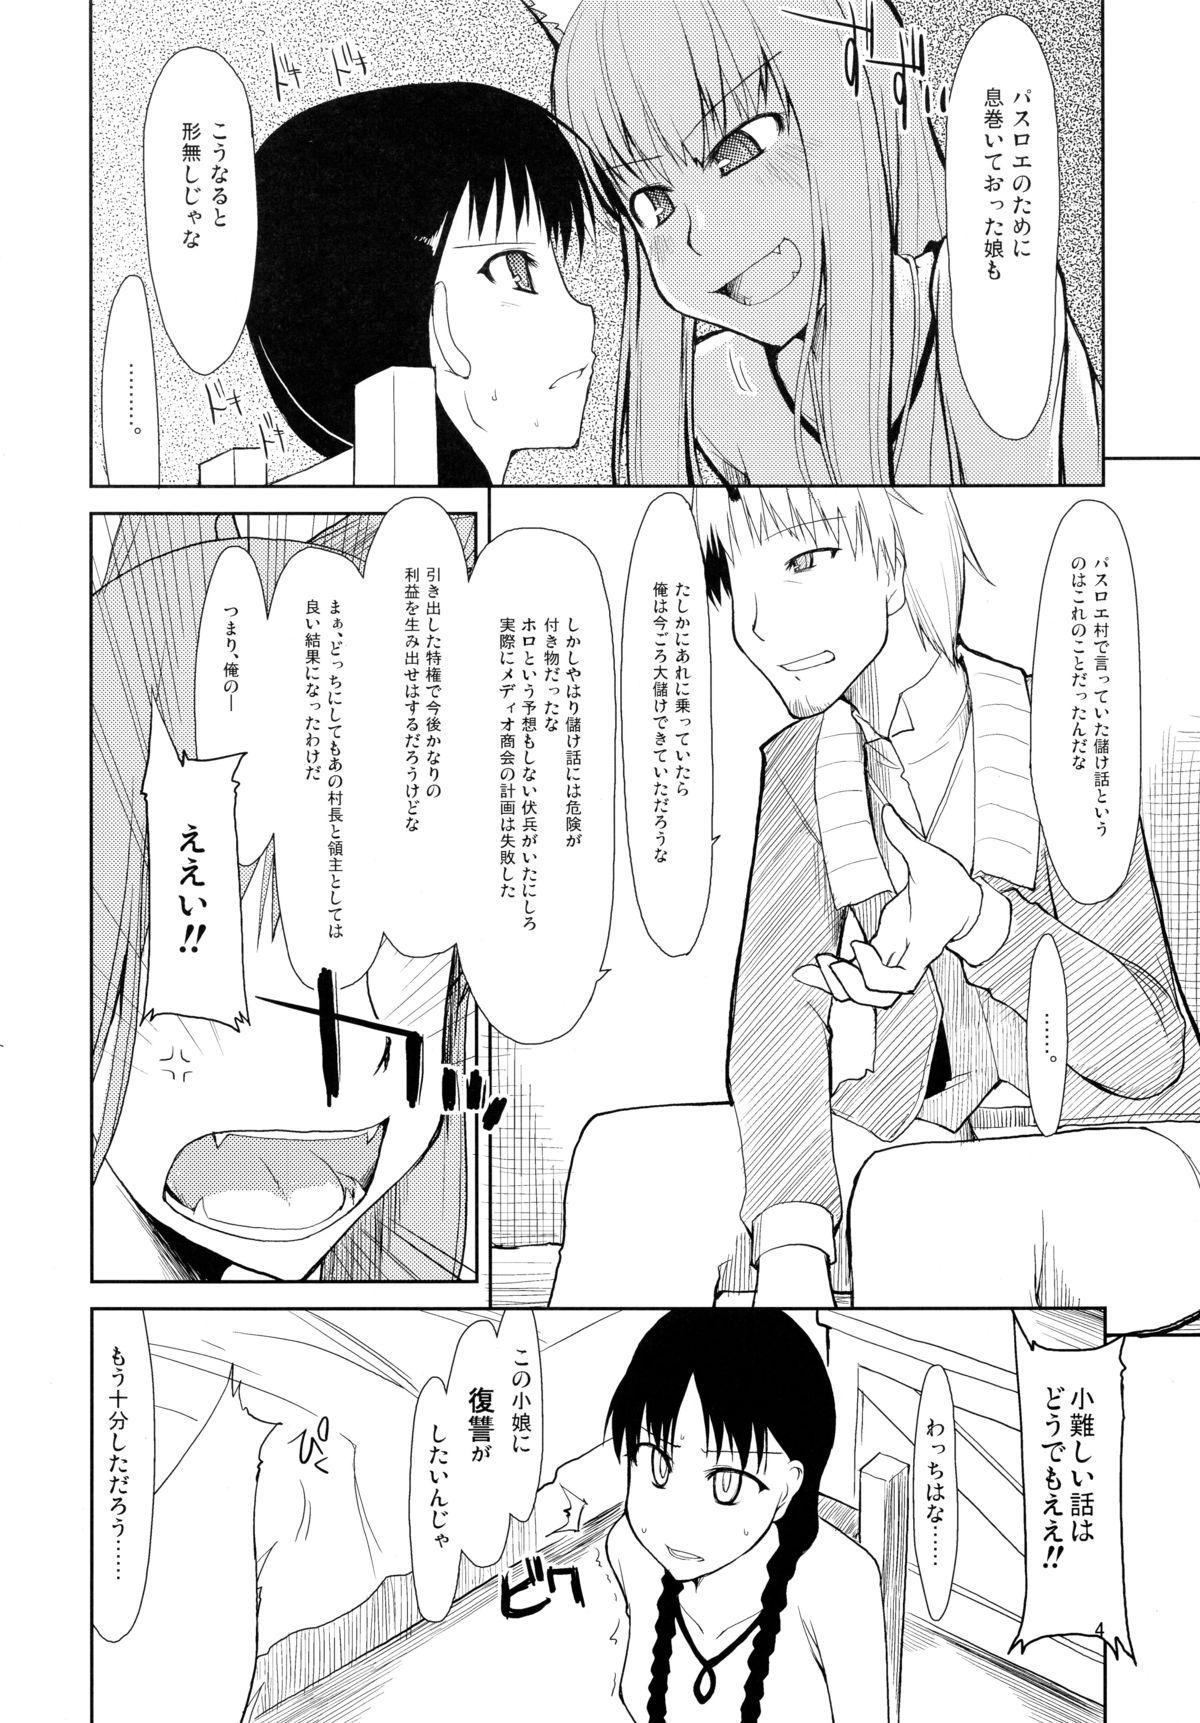 Shaking wolf’s regret - Spice and wolf Negao - Page 5